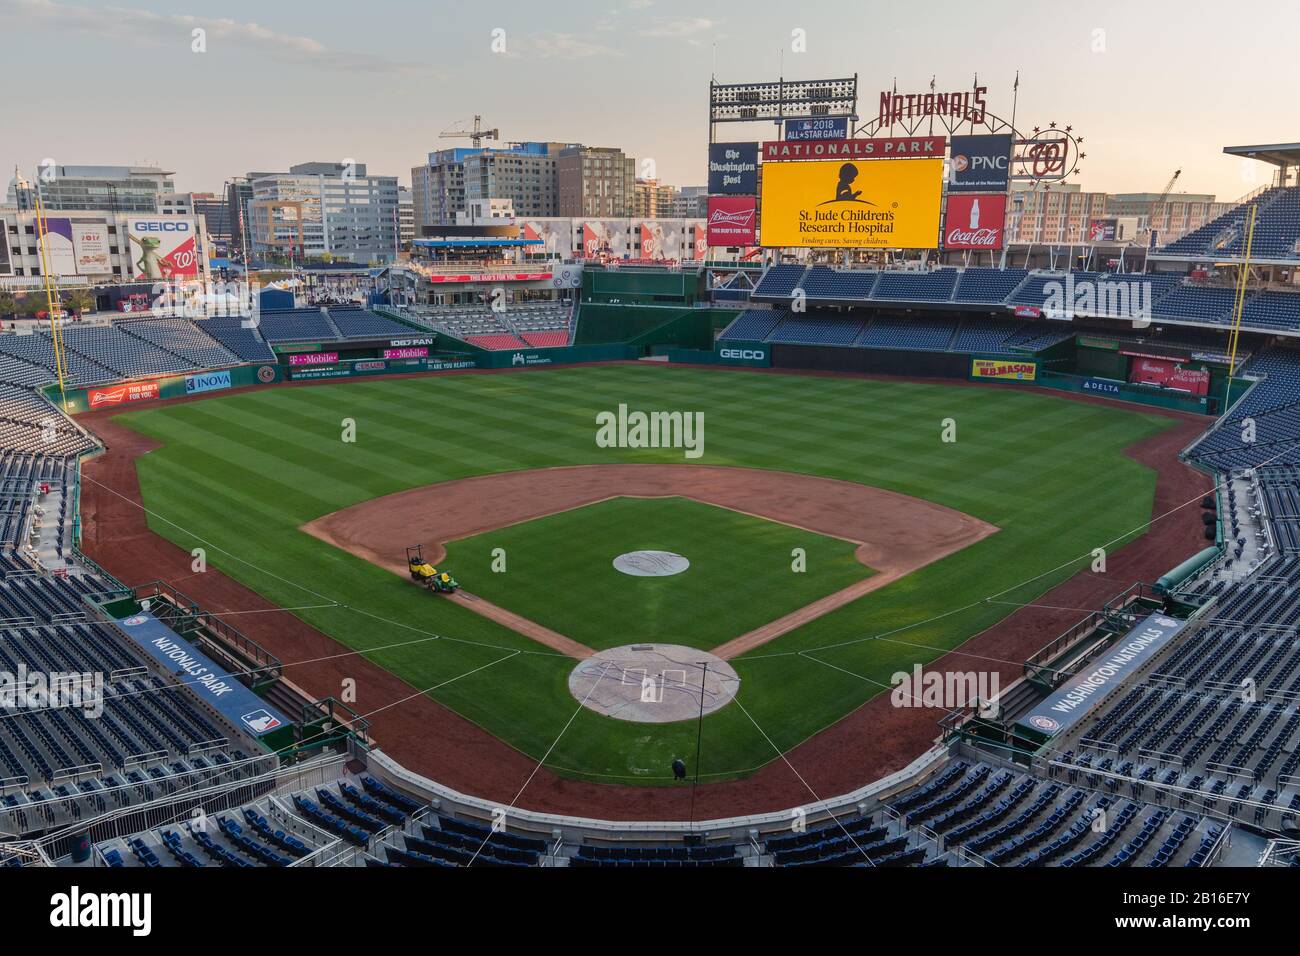 View looking down on the field of Nationals Park, home of the Washington Nationals in DC Stock Photo